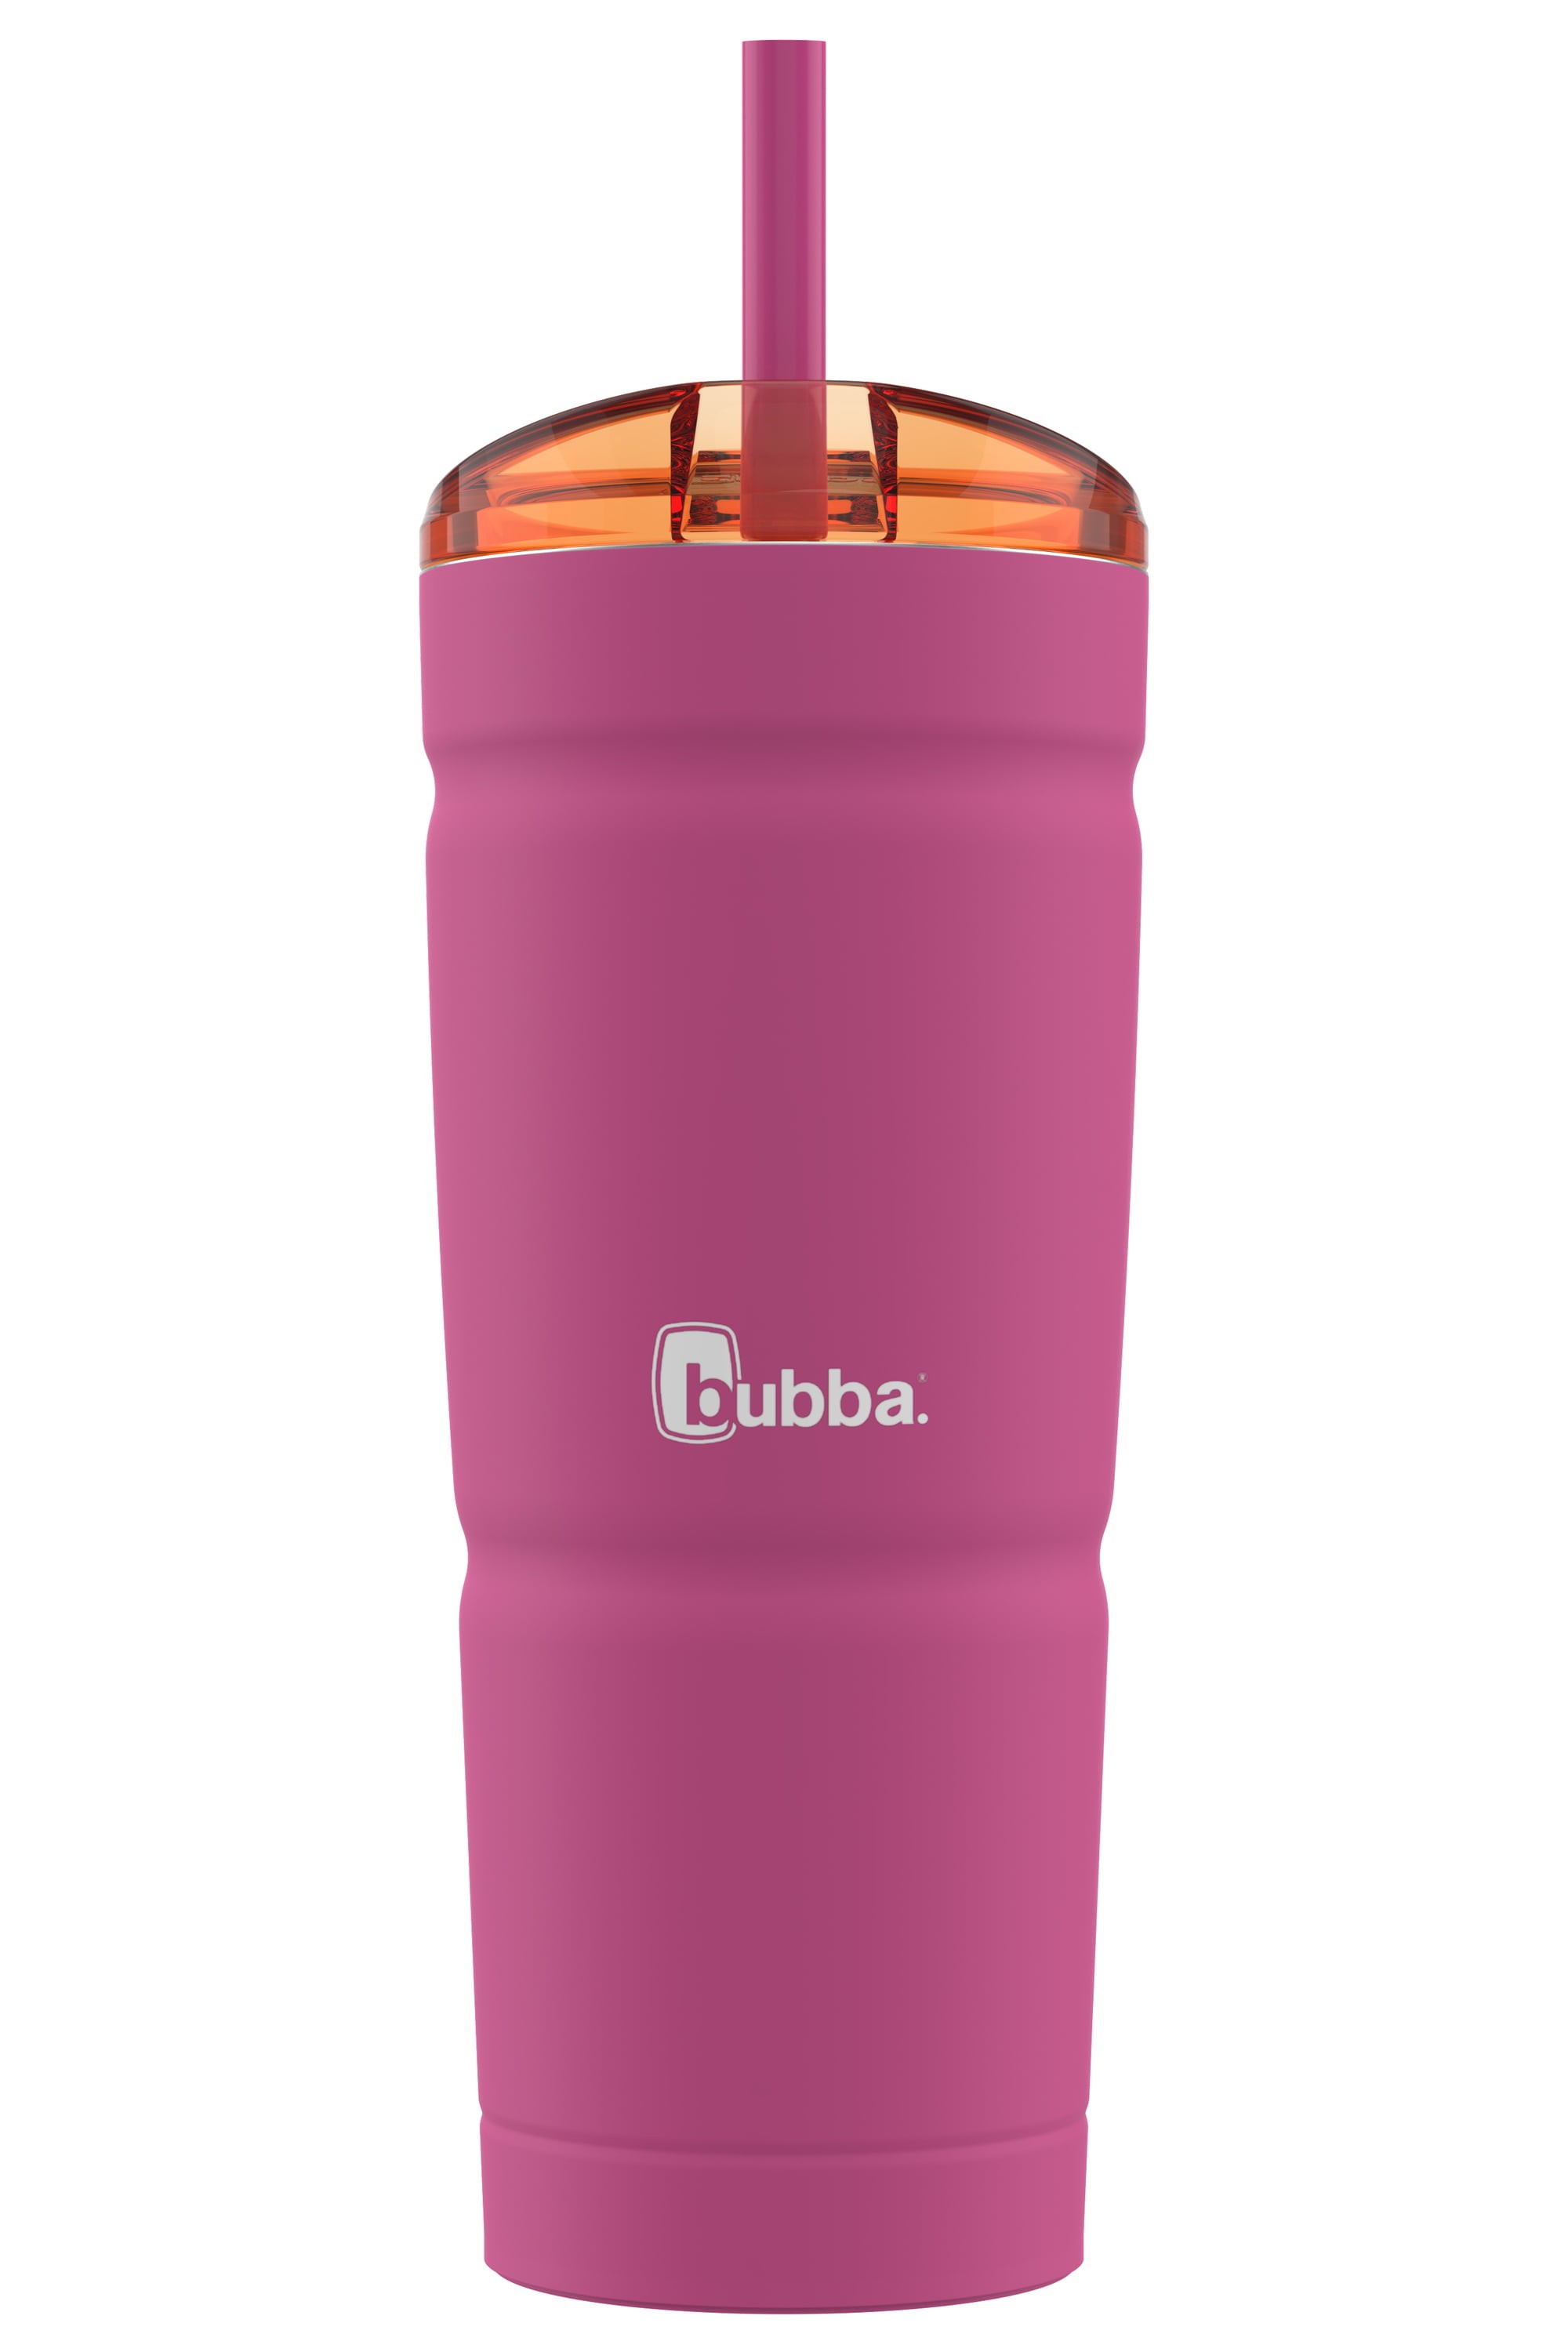 bubba Envy Clear Lid 32-fl oz Stainless Steel Water Bottle at